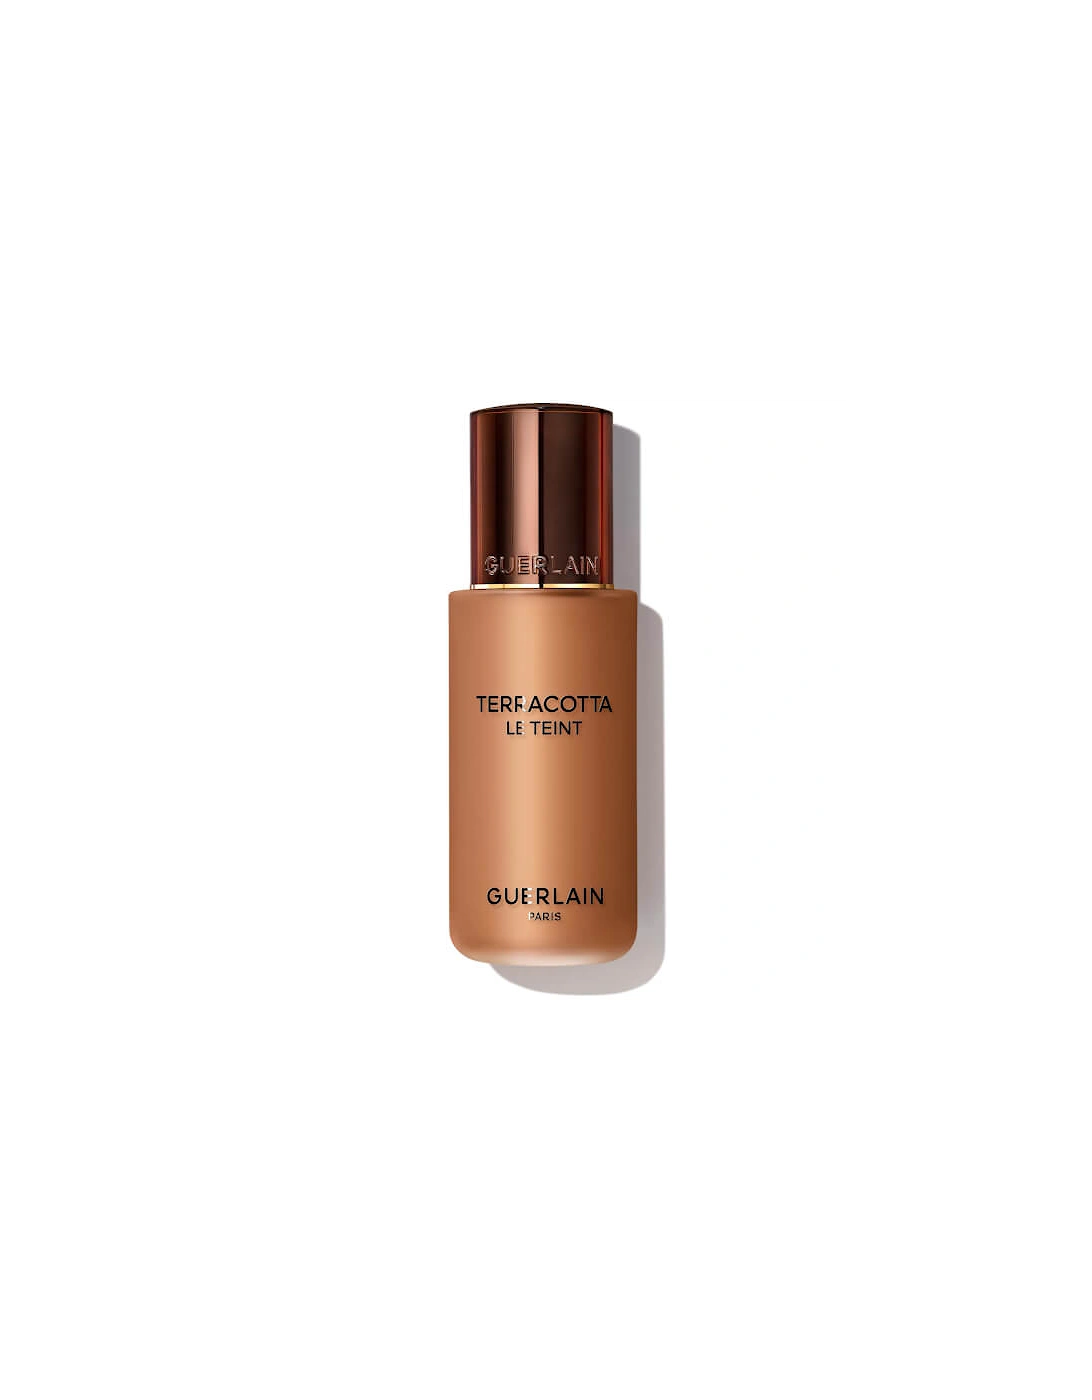 Terracotta Le Teint Healthy Glow Natural Perfection Foundation - 6W, 2 of 1